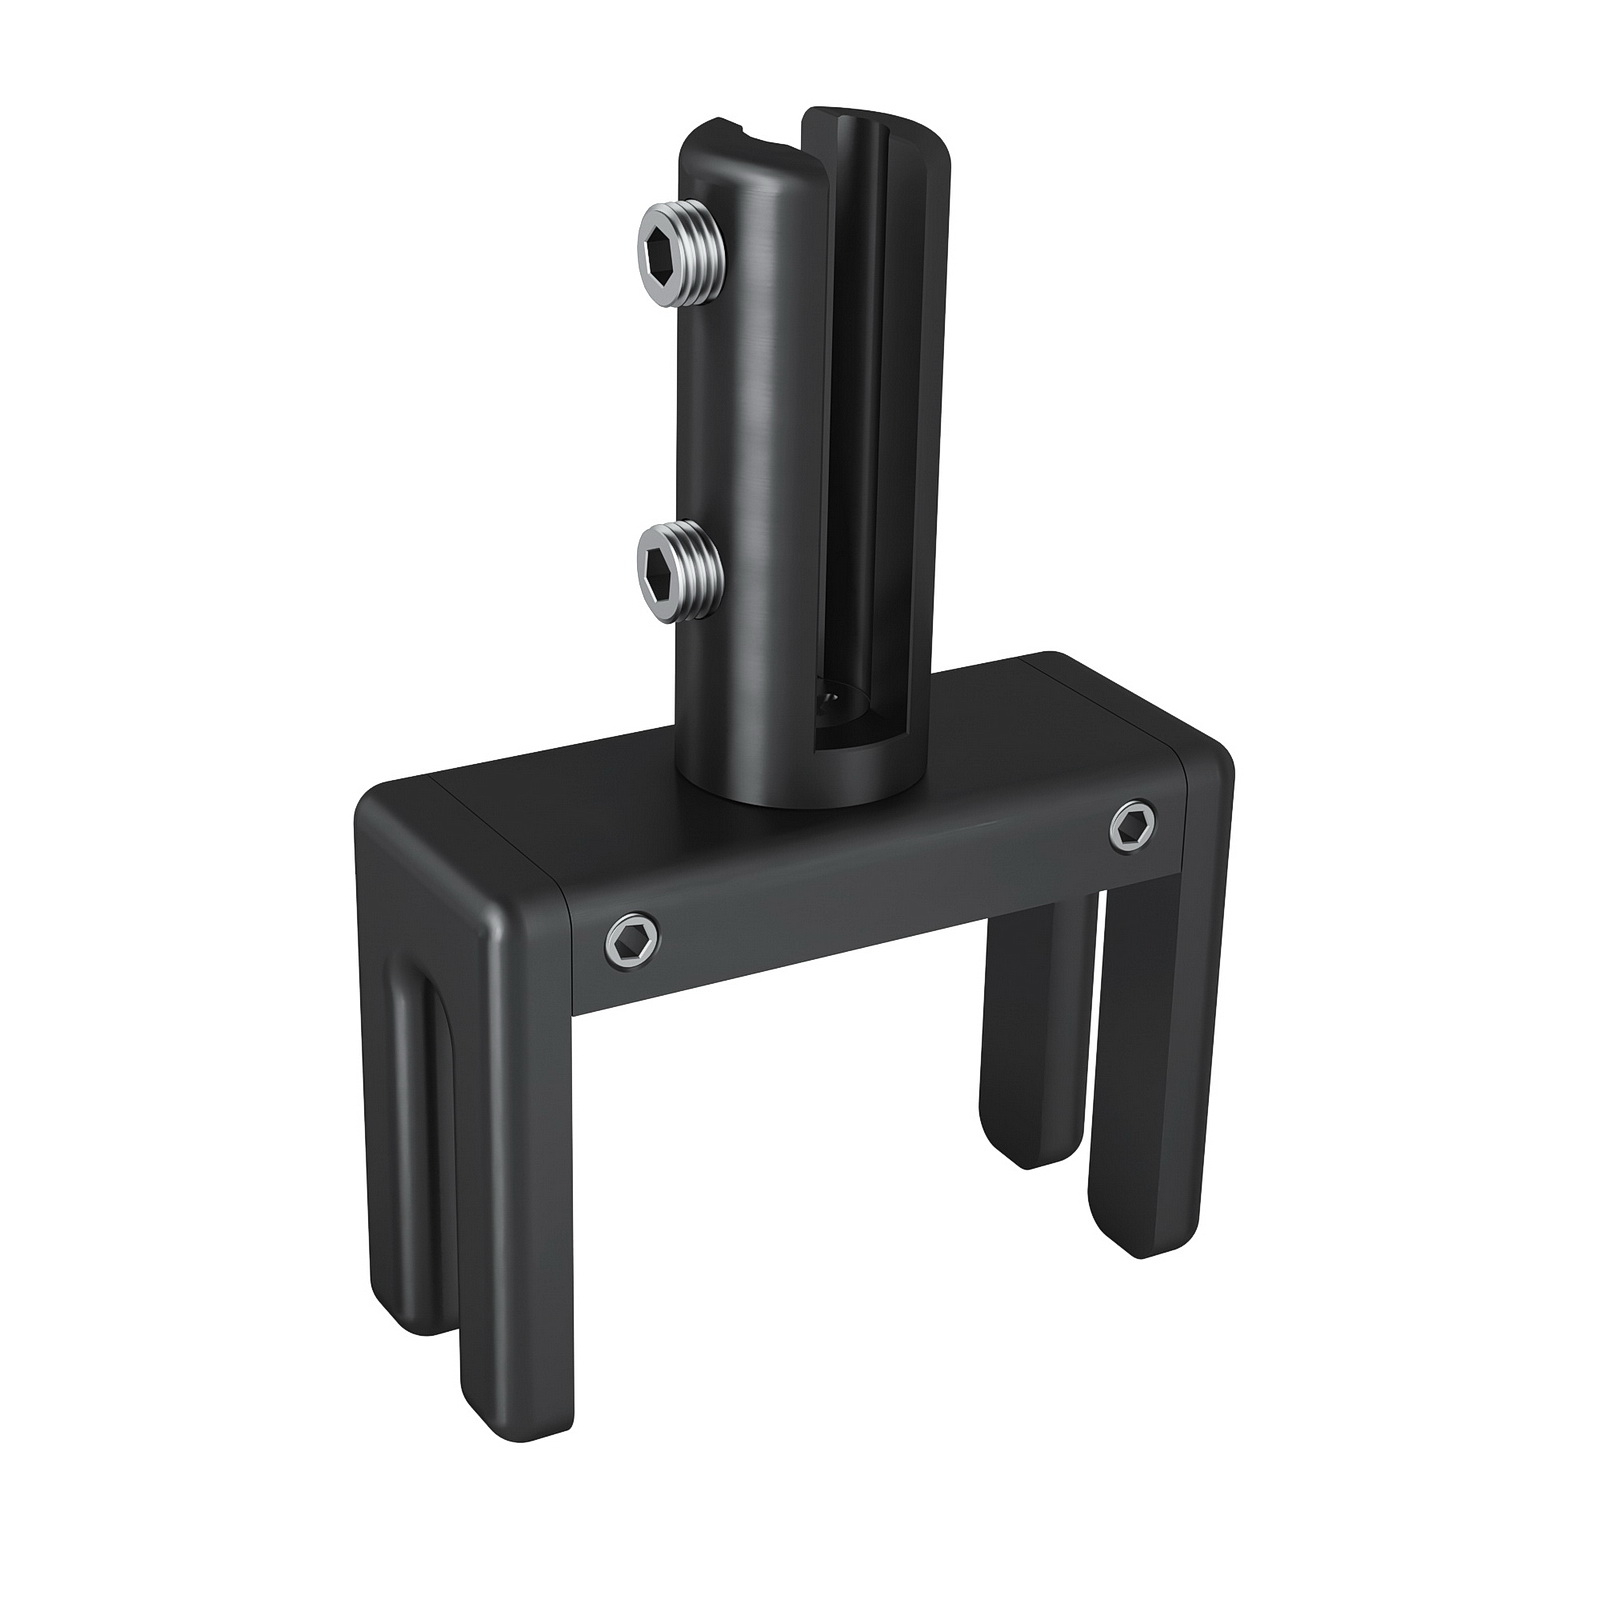 Set of 2, Adjustable Clamp, Aluminum Matte Black Anodized Finish, to Accommodate 1-3/4'' to 2-3/8'' Cubicle partition. Upt to 1/4'' material accepted on the fork